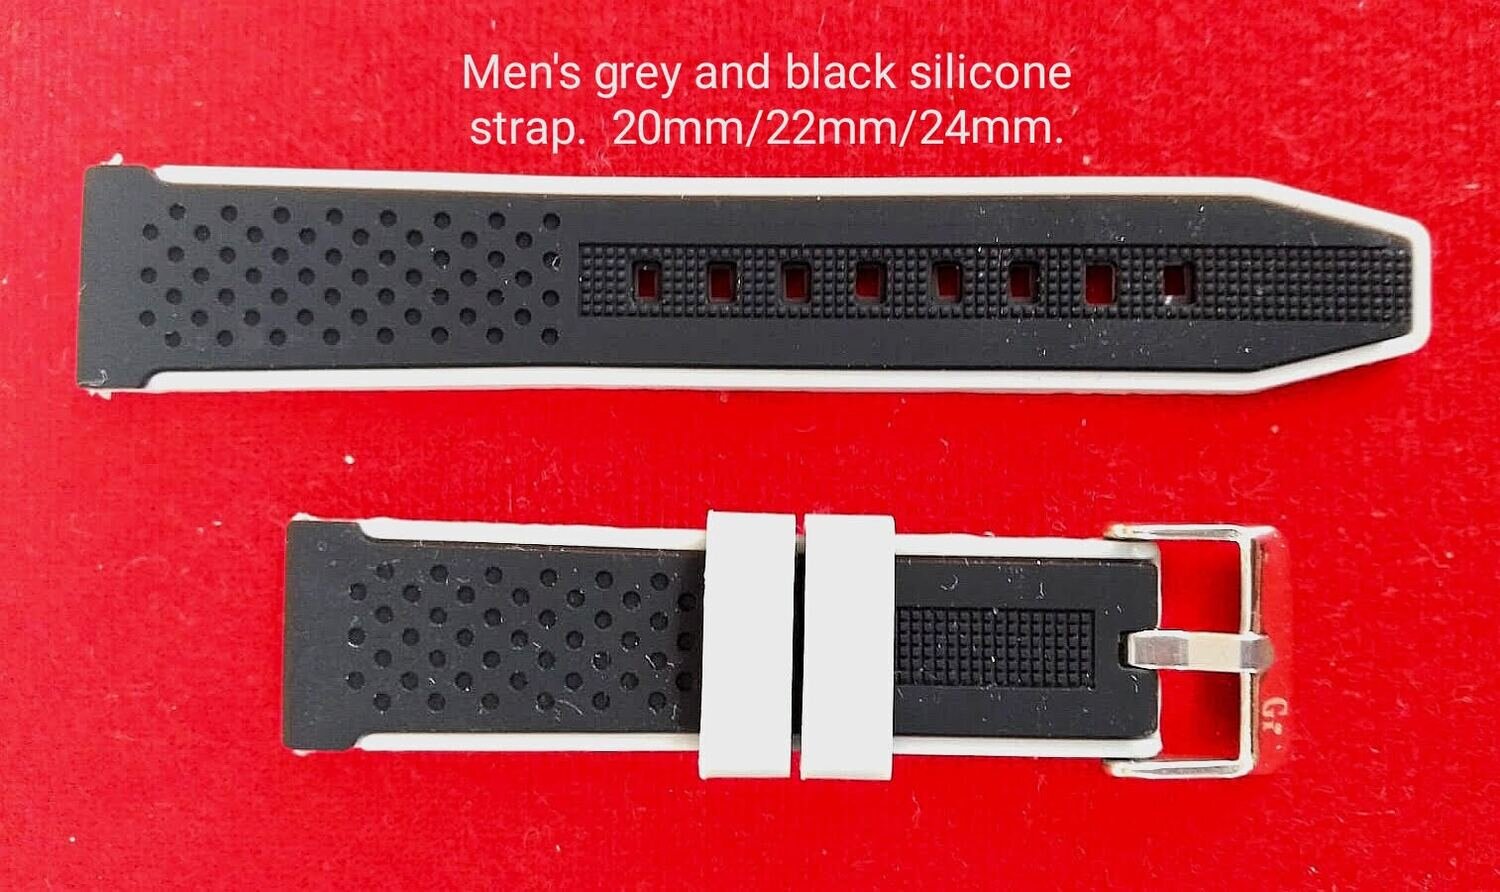 Men's grey and black silicone strap 20mm/22mm/24mm